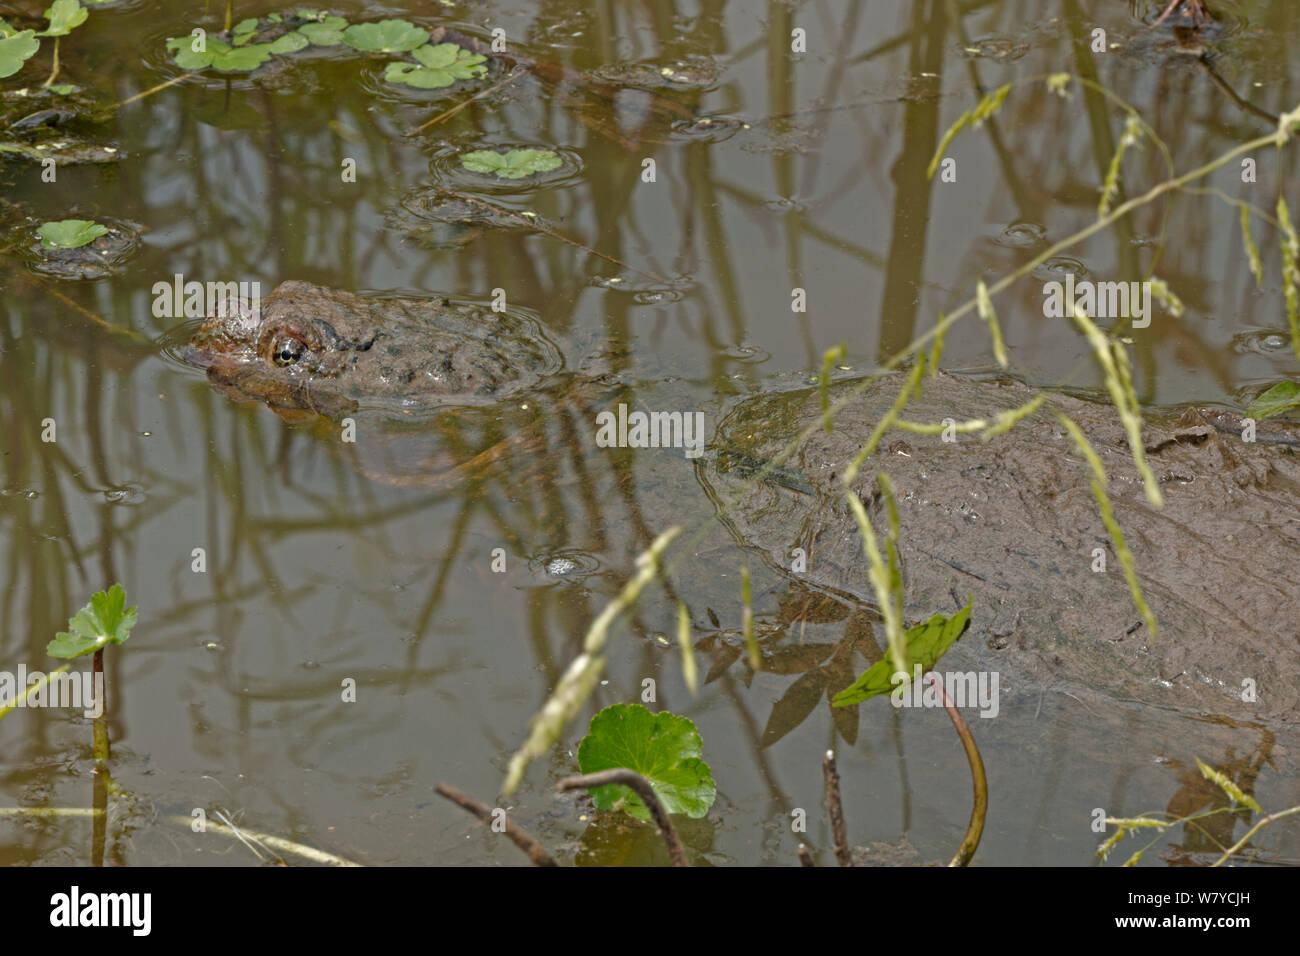 Snapping turtle (Chelydra serpentina) breathing at surface, covered in algae, Virginia, USA. September. Stock Photo